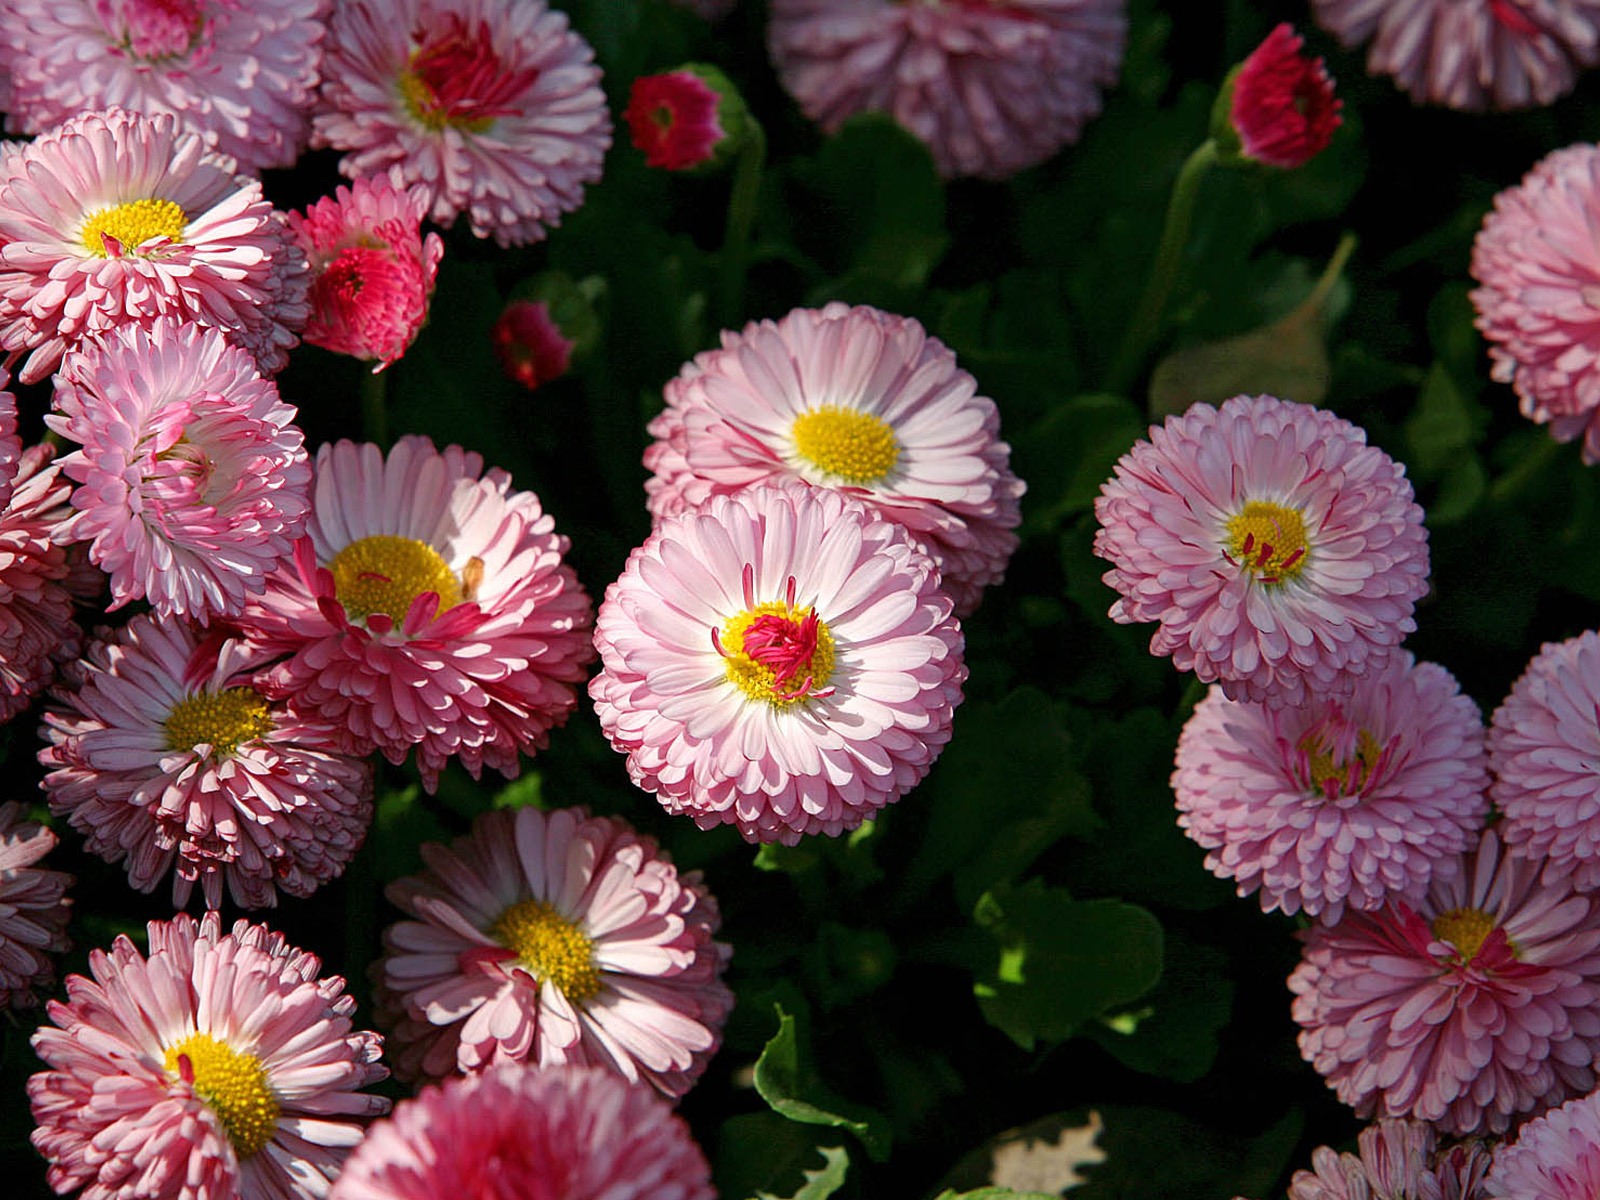 Daisies flowers close-up HD wallpapers #16 - 1600x1200